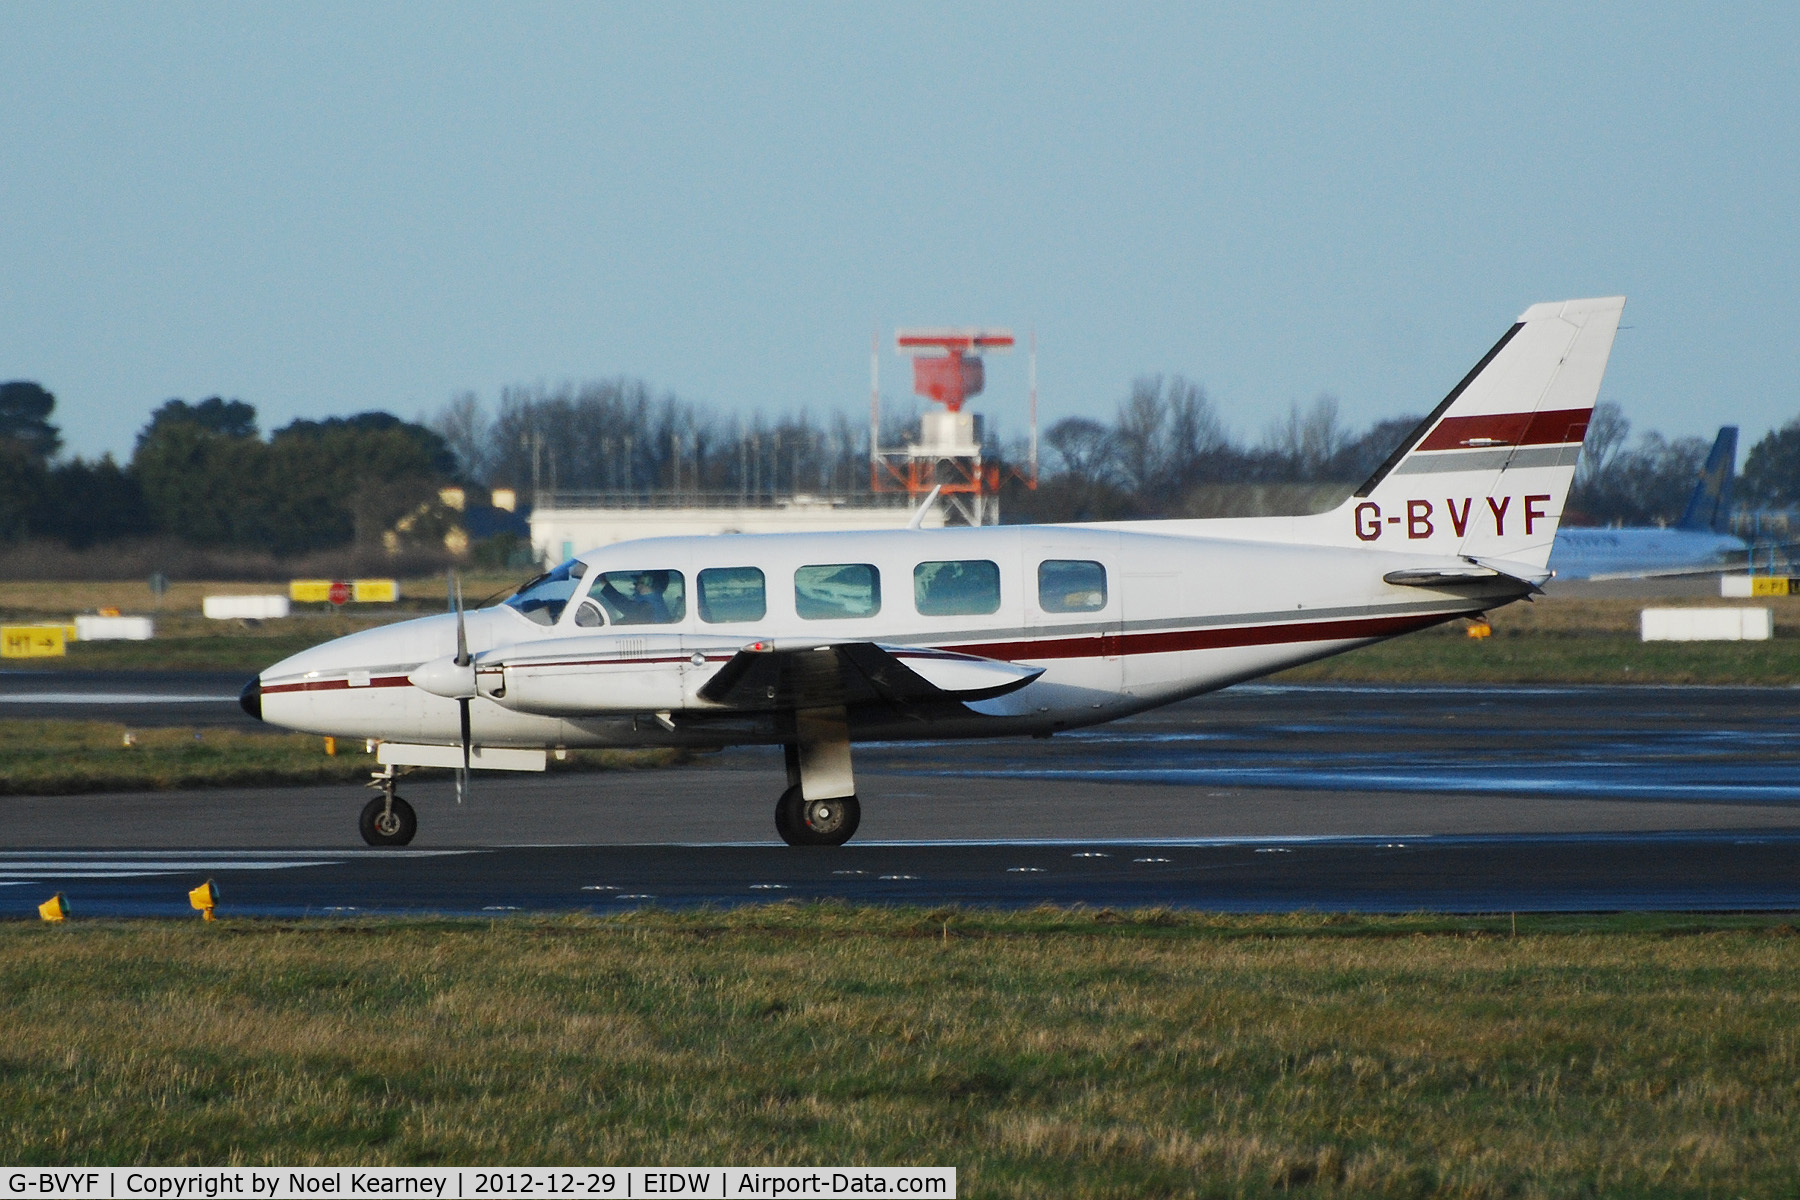 G-BVYF, 1979 Piper PA-31-350 Navajo Chieftain Chieftain C/N 31-7952102, Photographed about to depart off Rwy 28 at EIDW.